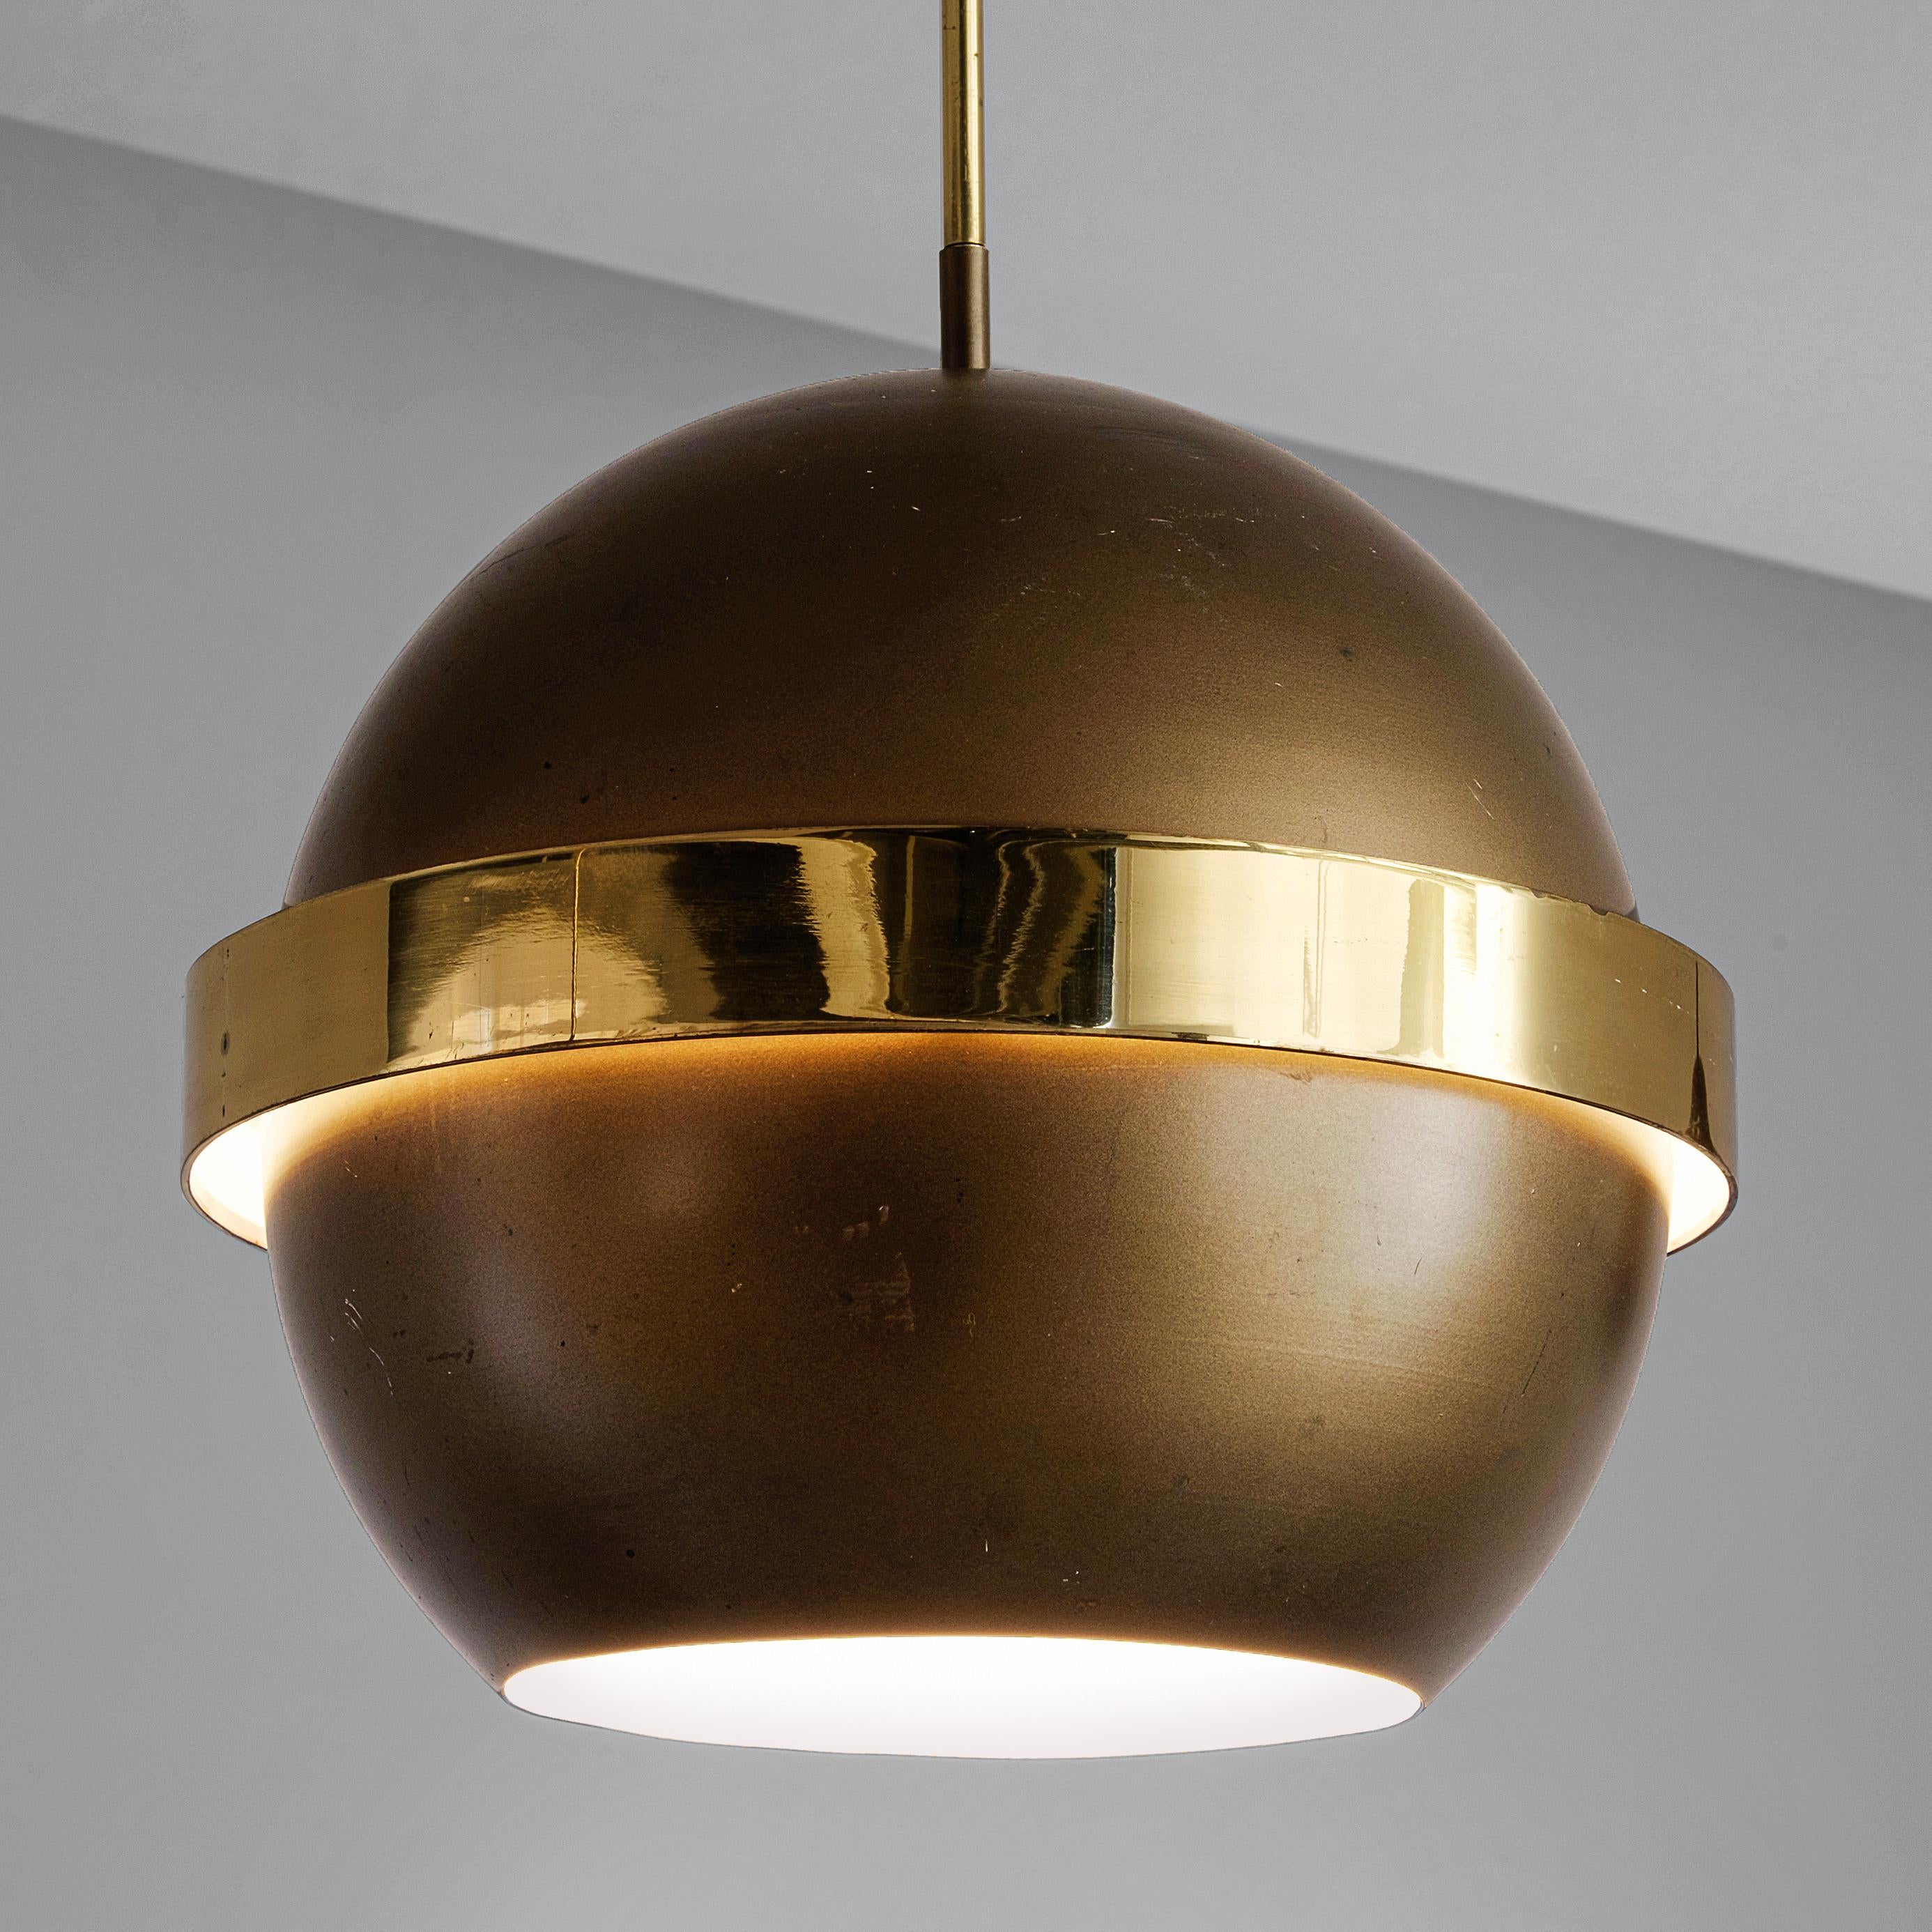 Pendant, in brass and metal, The Netherlands 1970s. 

This elegant pendant light features a striking combination of bronze and brass tones. The shade is designed as a metal globe with a white-coated interior and a rich bronze exterior. What sets